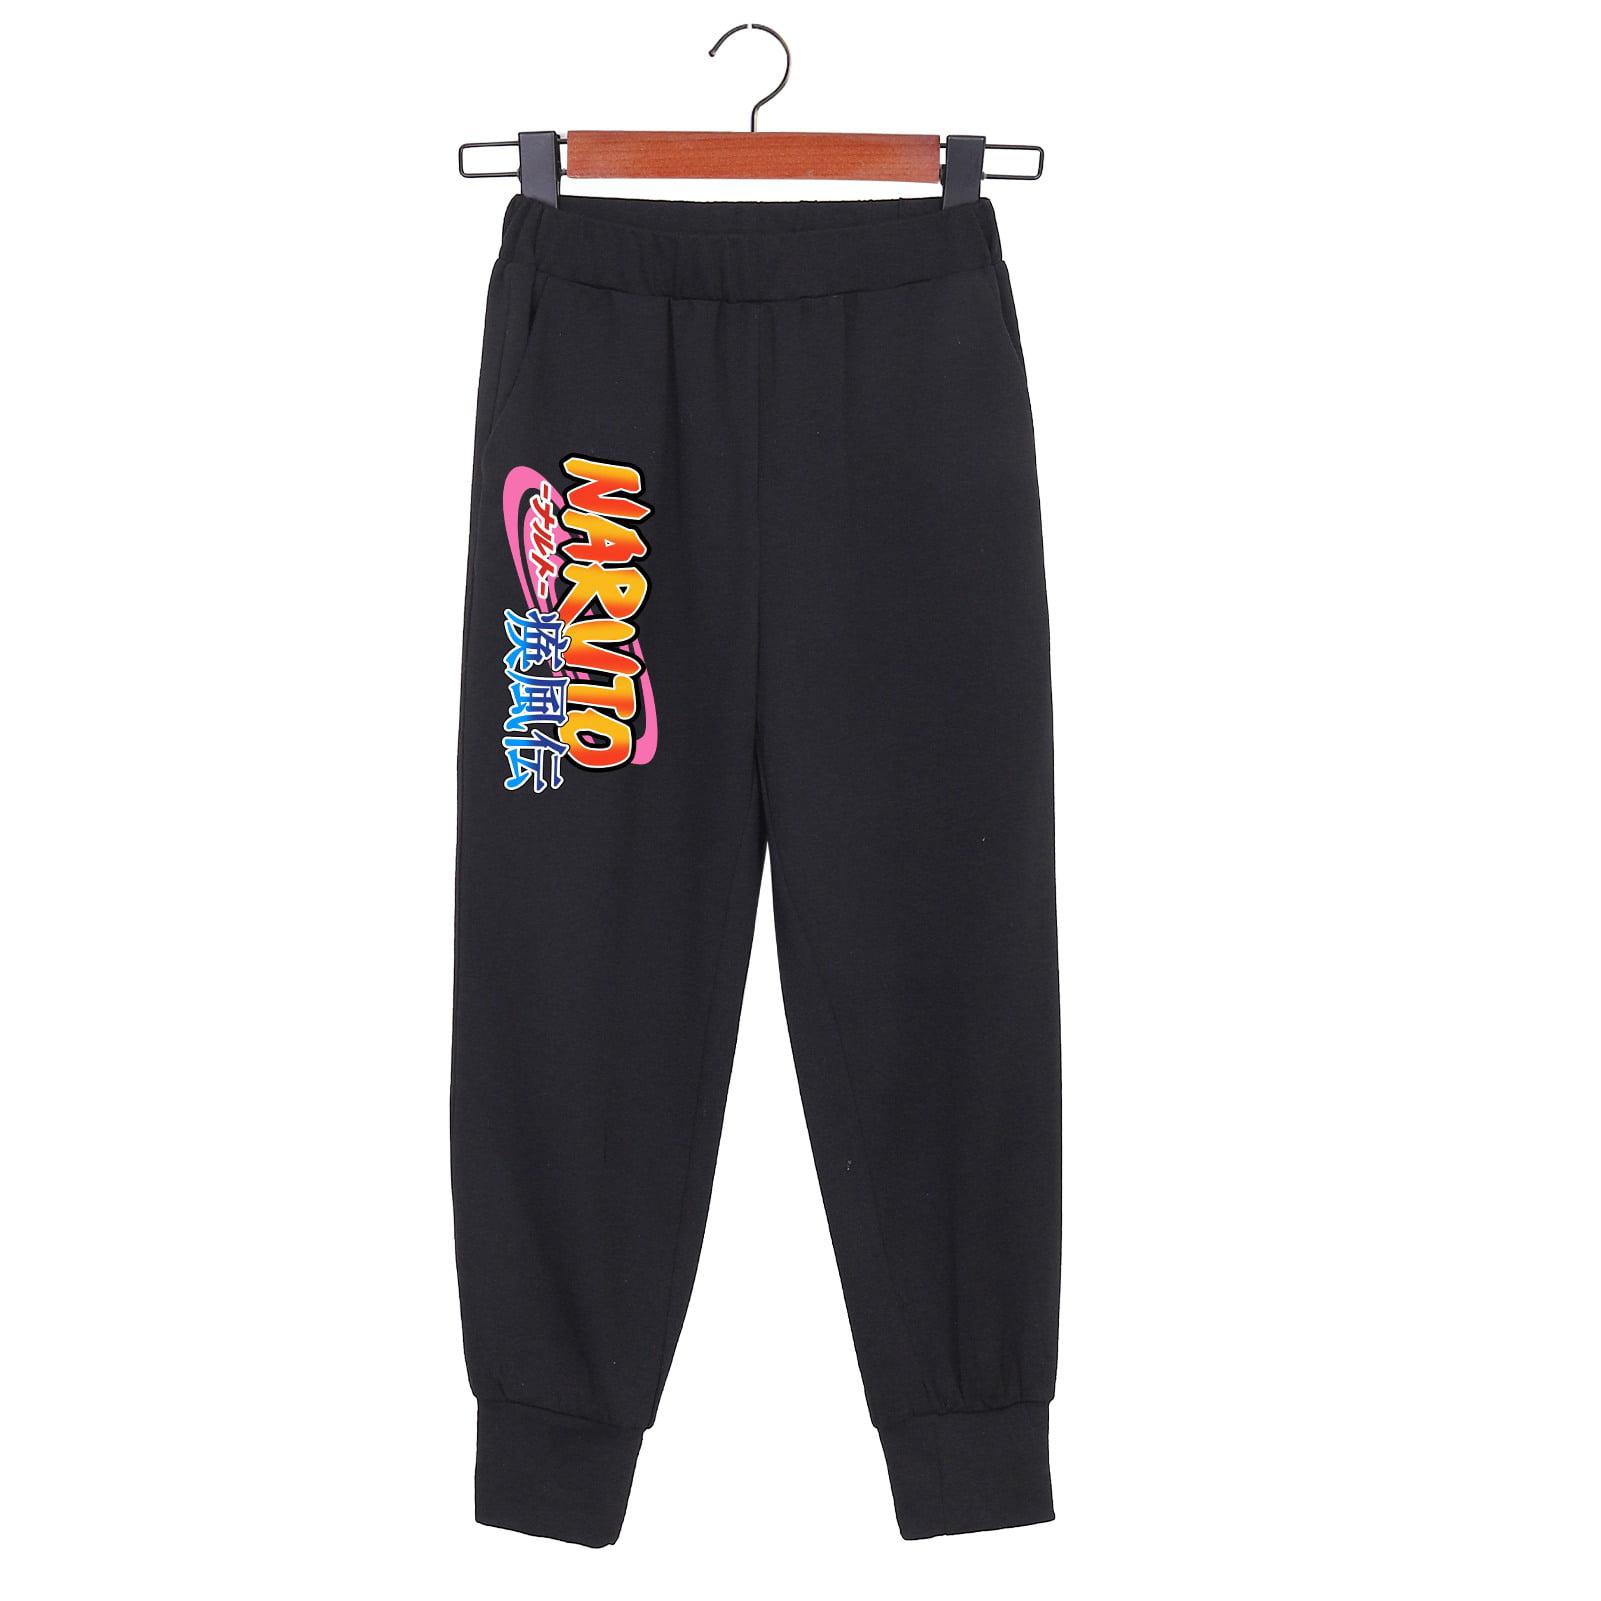 EXV Naruto Hoodie and Sweatpants 2 Piece Pullover Sweatshirt Suit for Boys Girls Youth Teens 